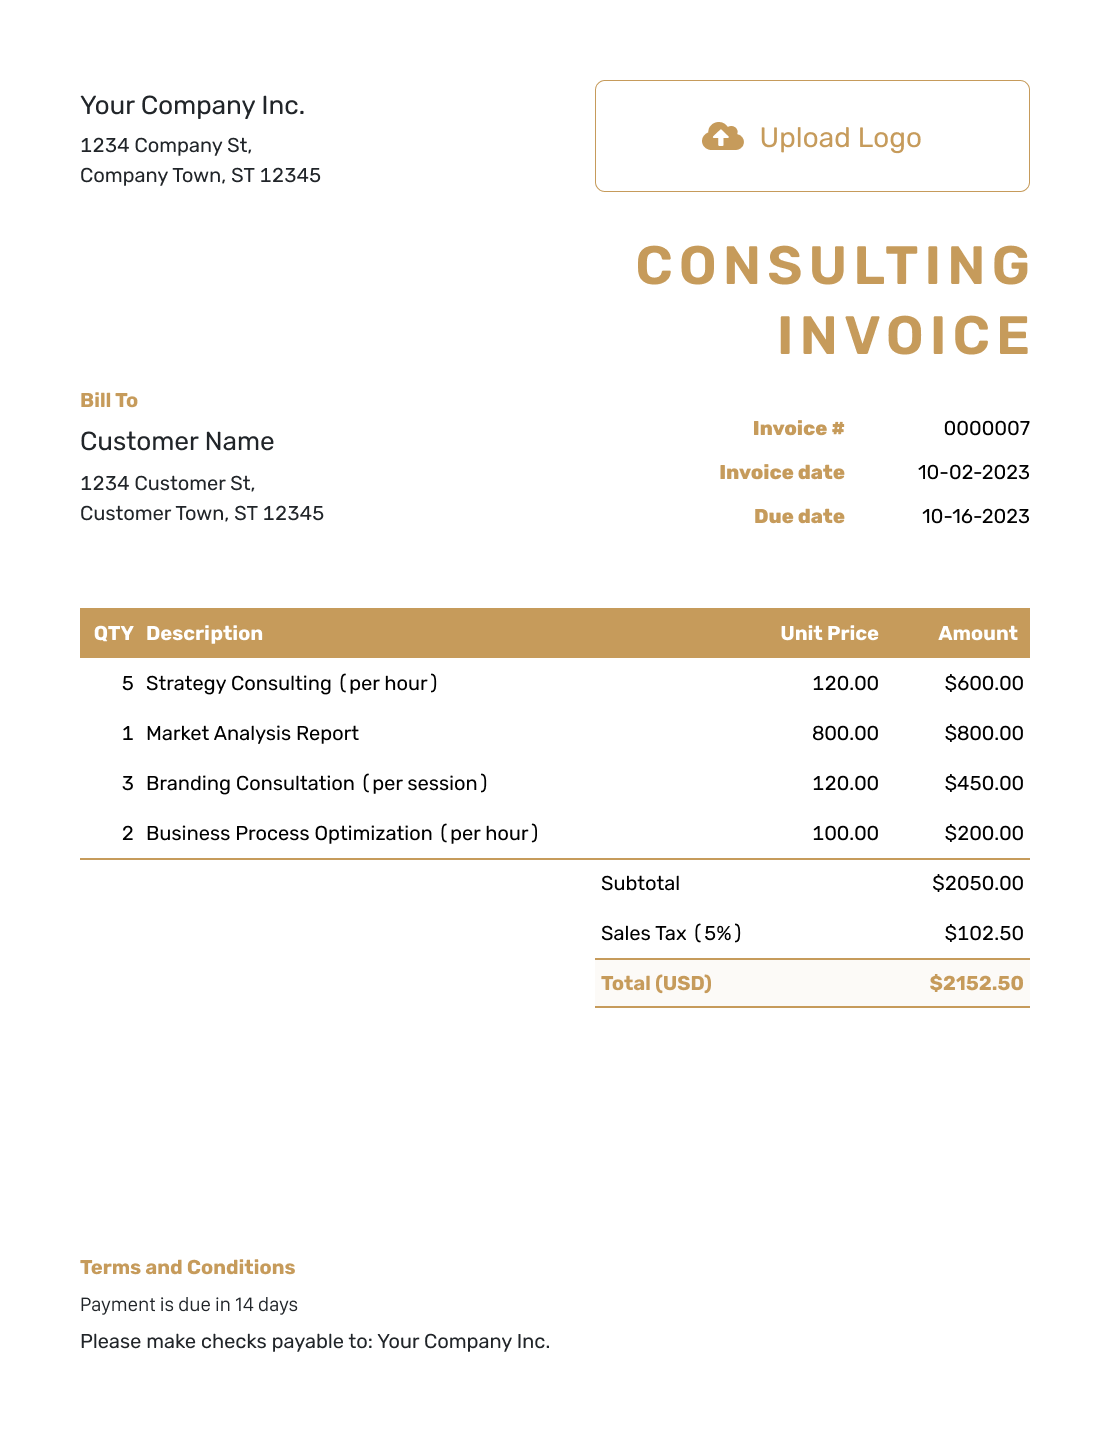 Basic Consulting Invoice Template